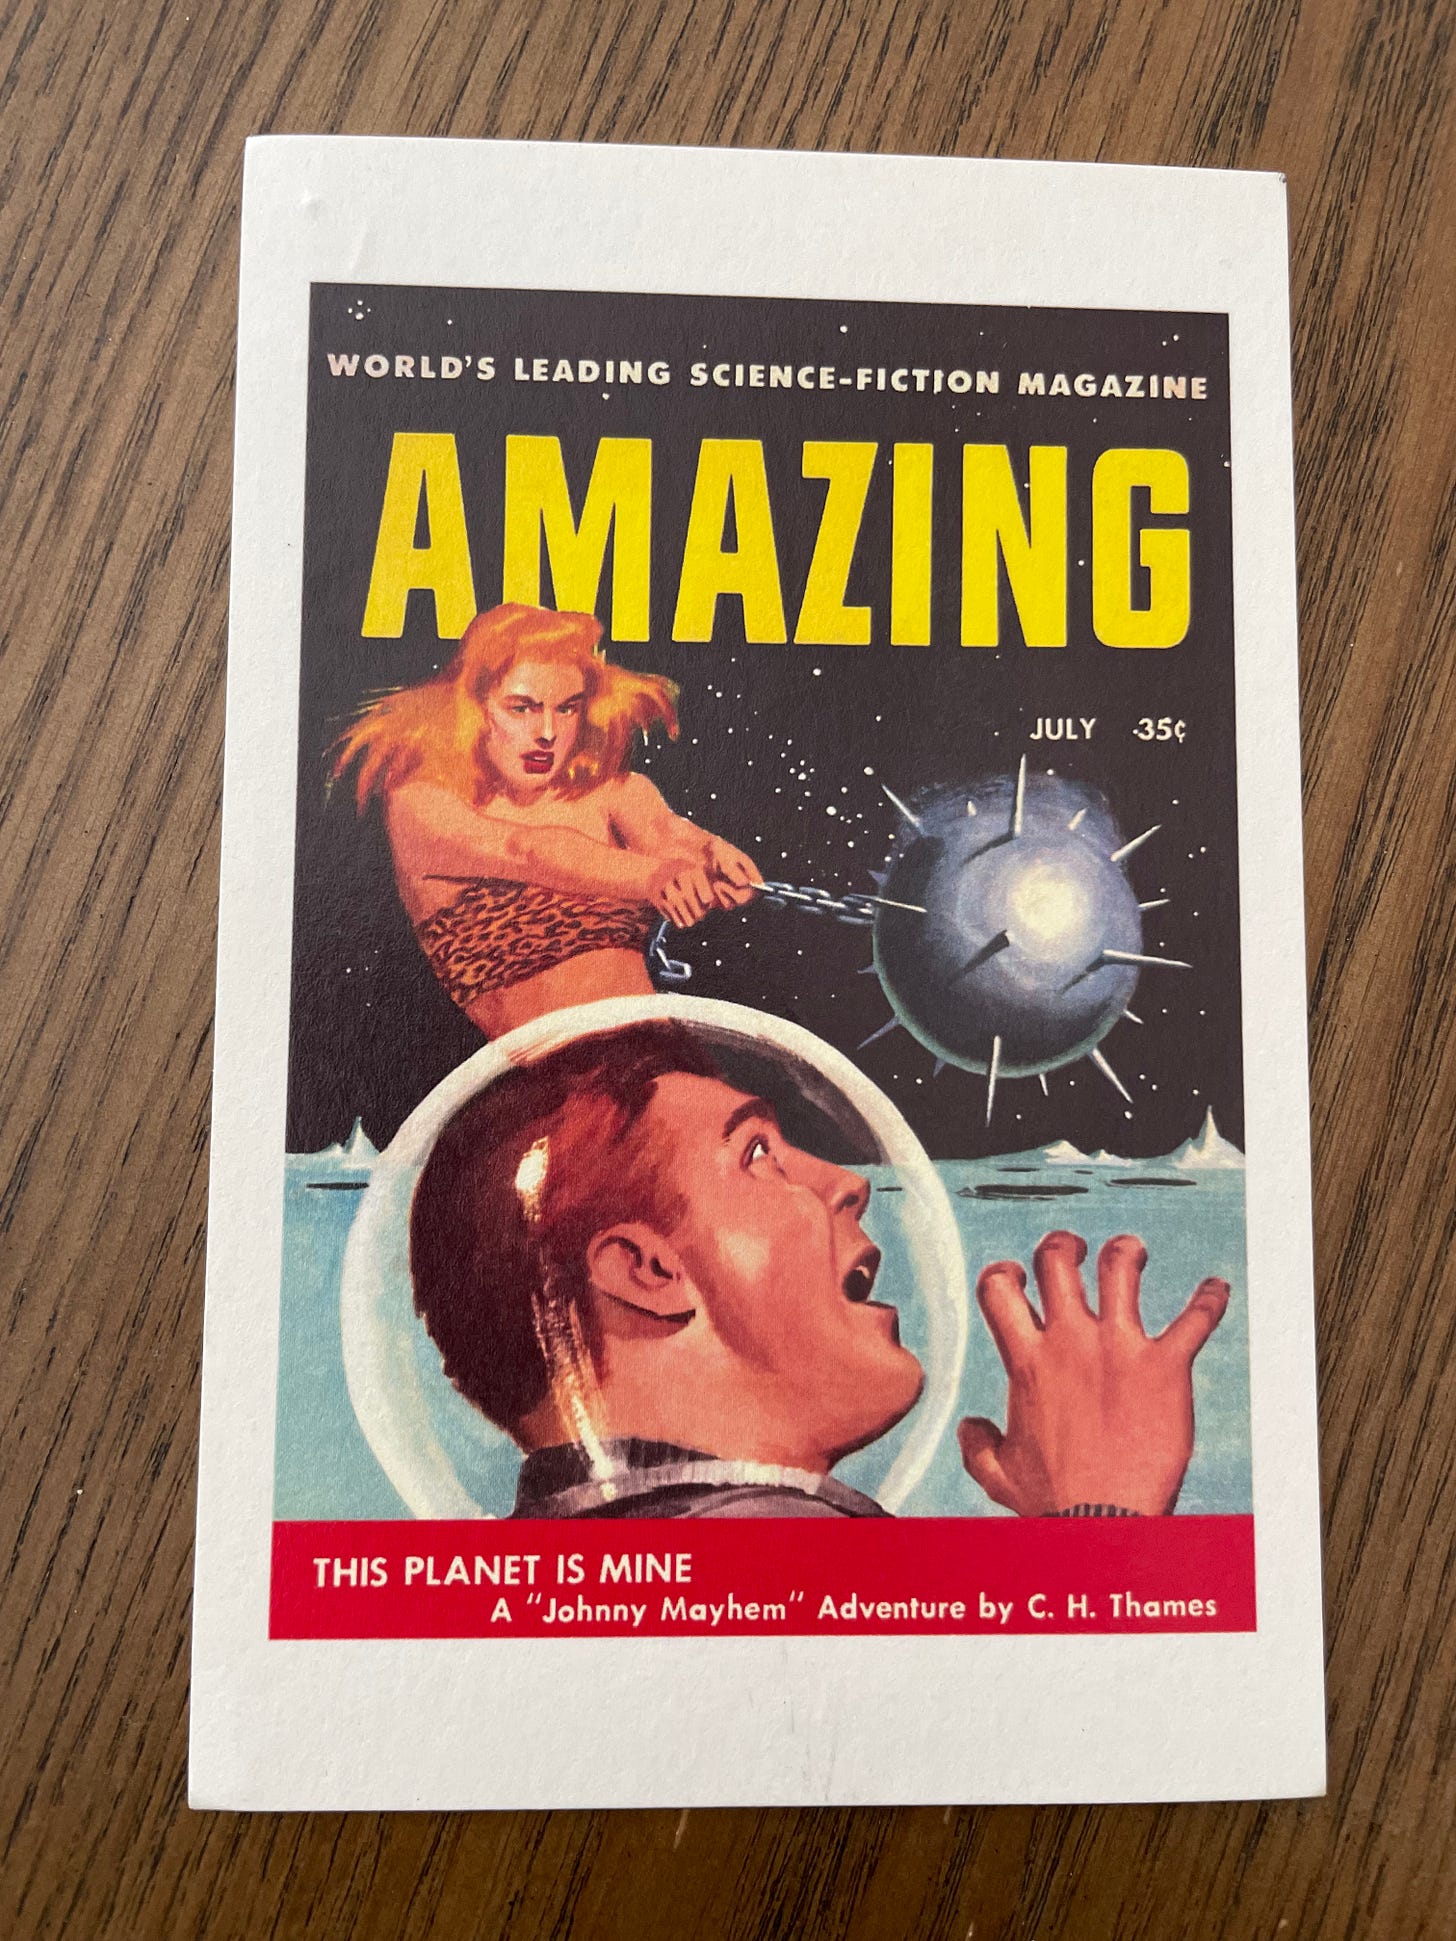 A post card made from the cover of the old sci-fi magazine AMAZING. The image is an illustration of a woman swinging a large mace at the head of an astronaut wearing a glass orb helmet.